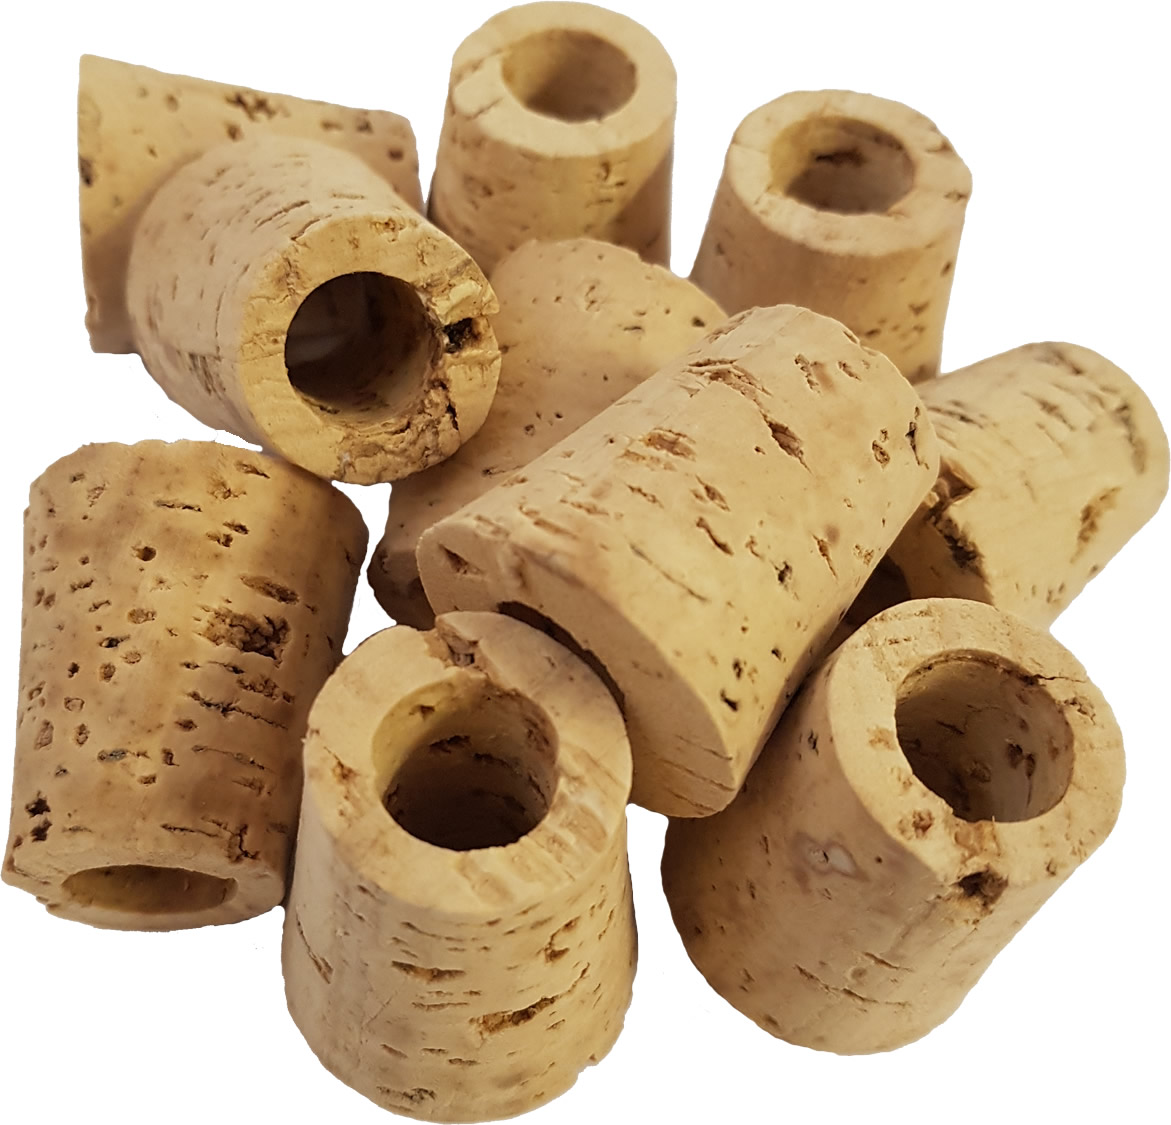 10 x Natural Corks for Optics or Spirit Measures 1 Gallon by Chabrias Ltd 